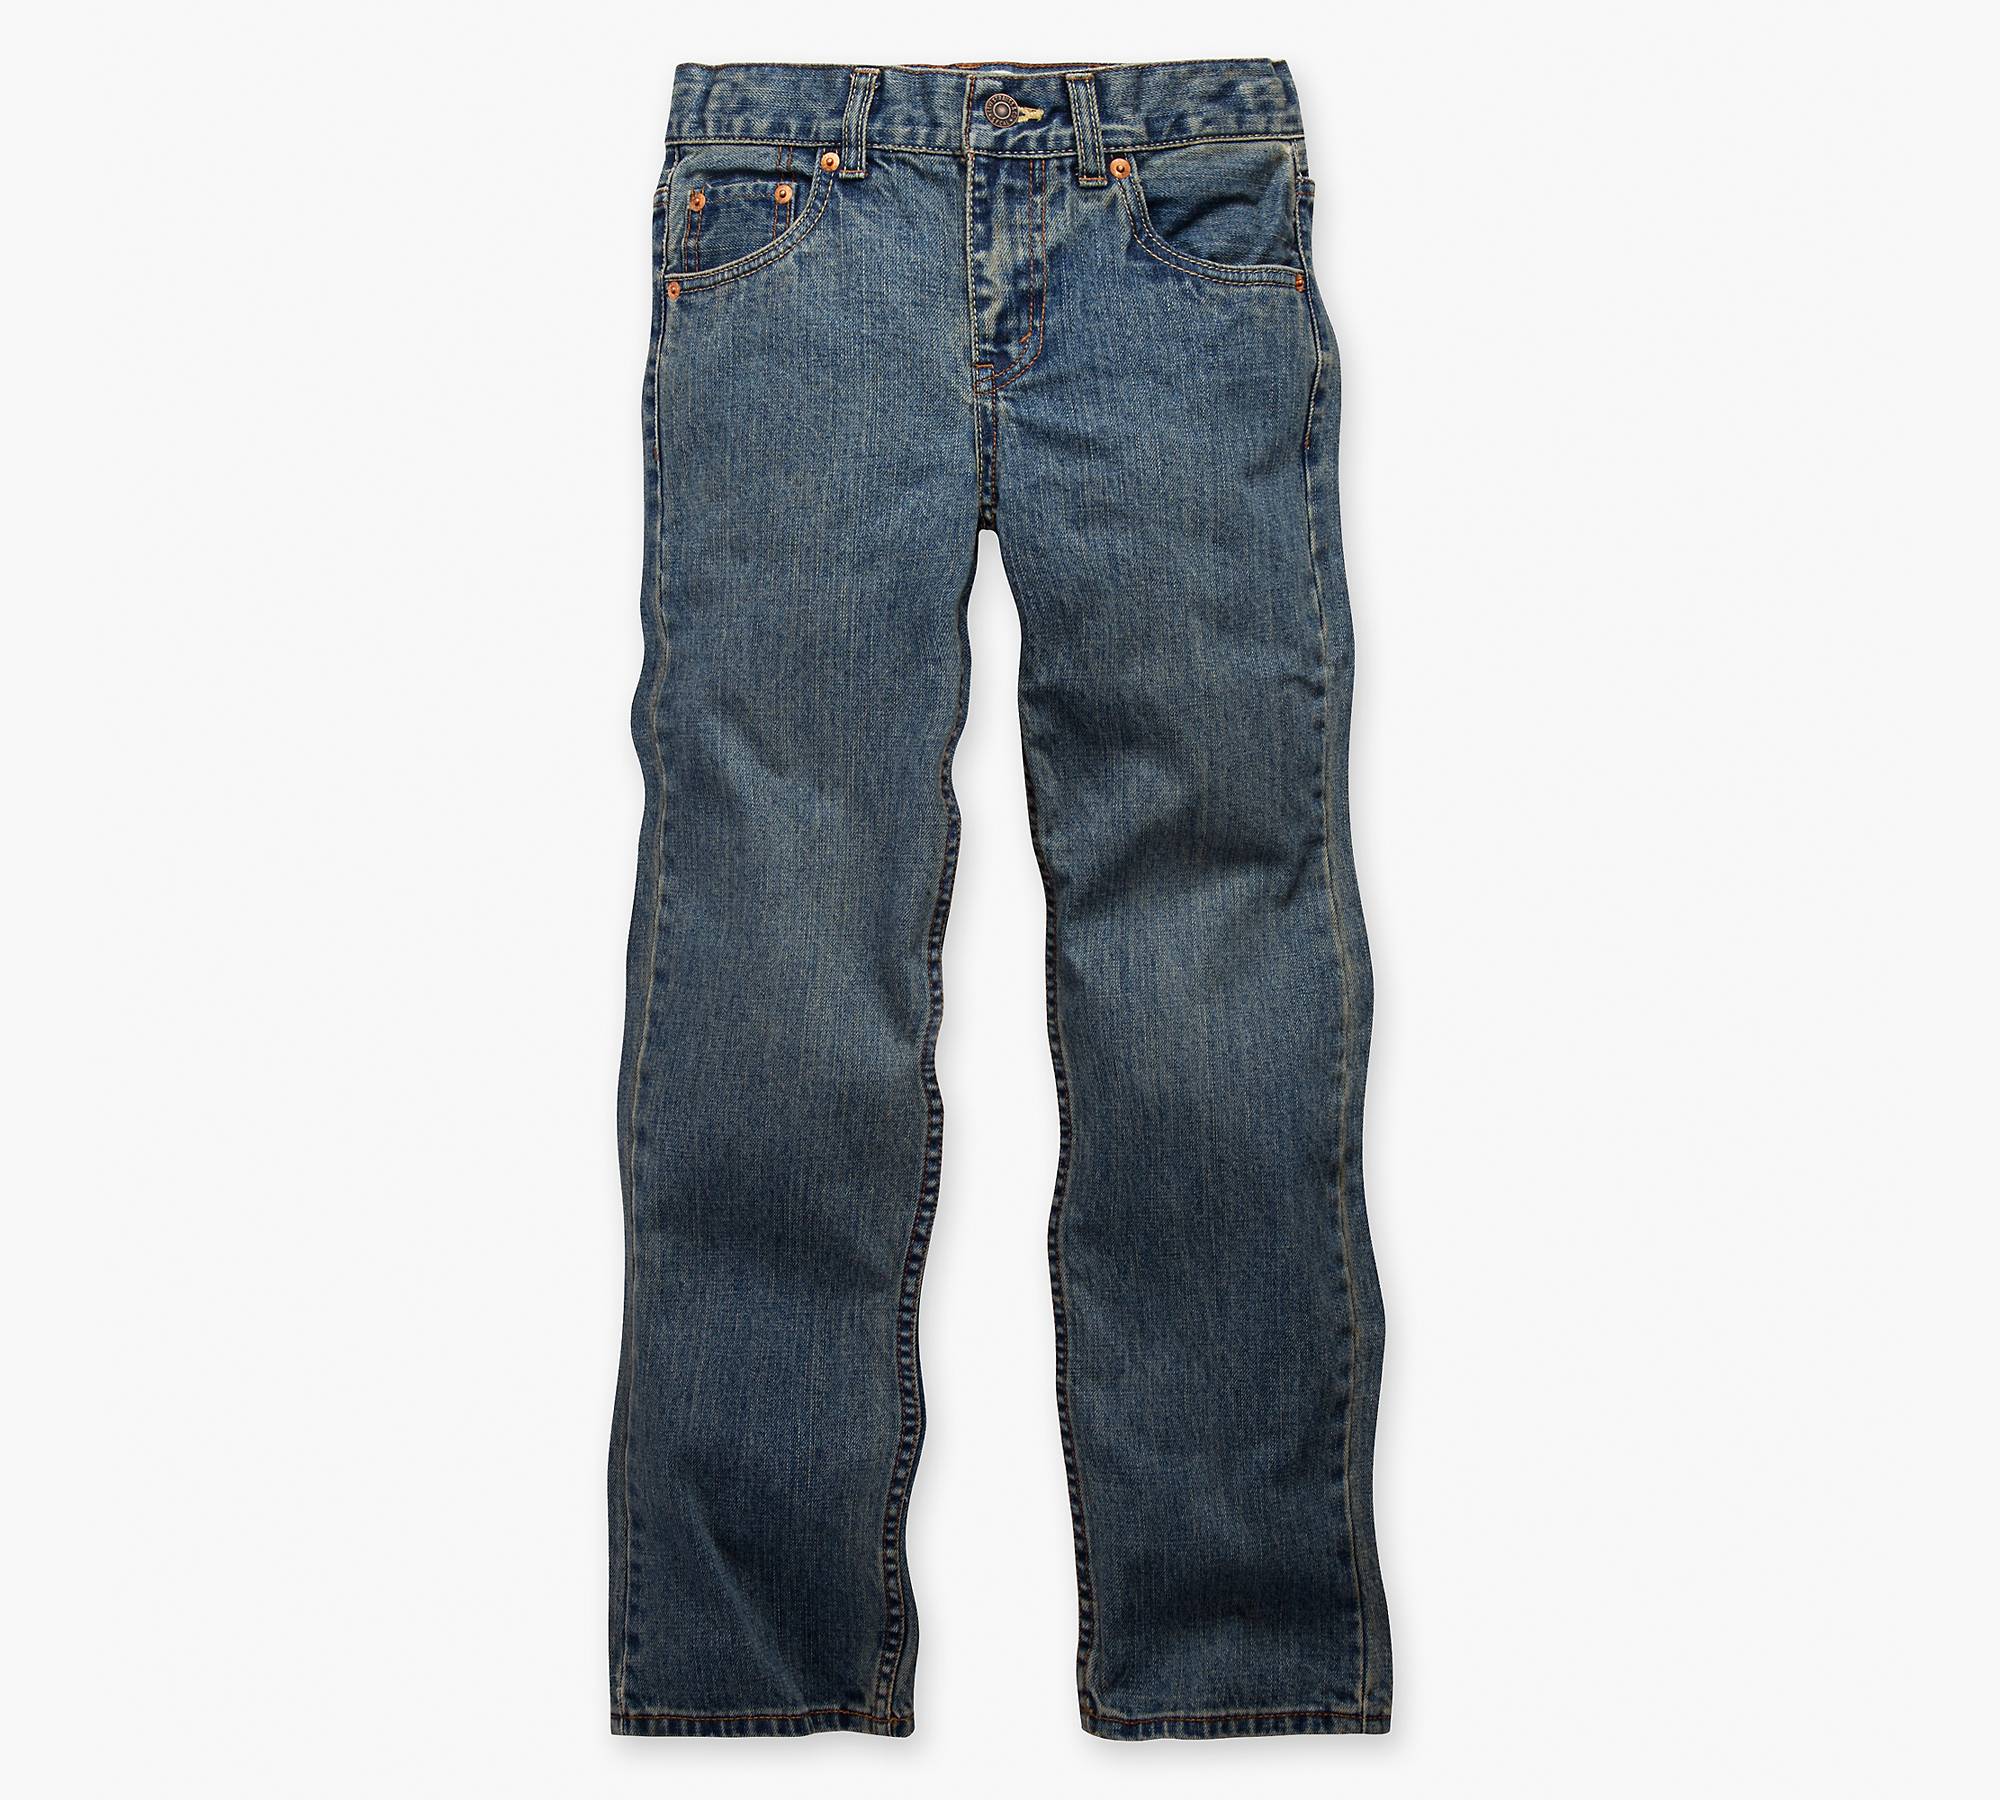 550™ Relaxed Fit Big Boys Jeans 8-20 (Husky) 1